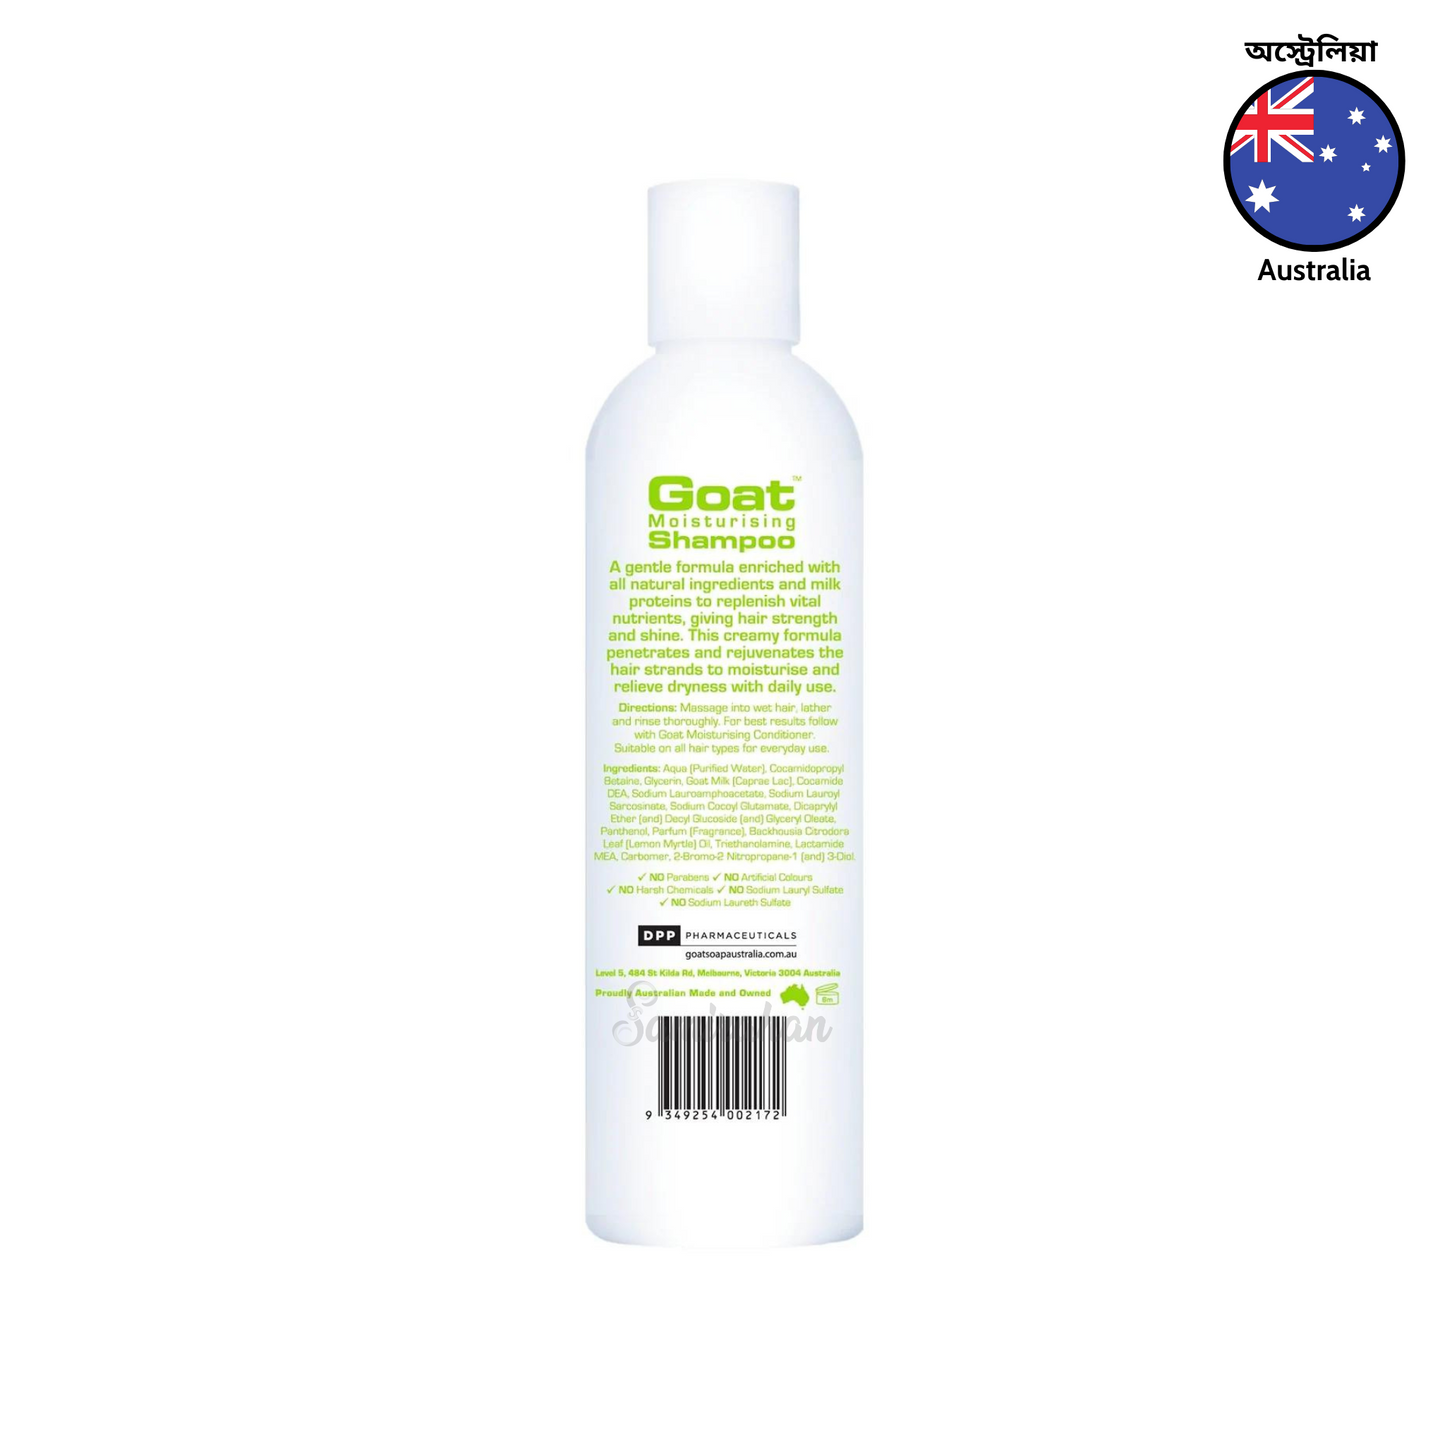 Goat Milk Moisturising Shampoo With Lemon Myrtle revitalizes your hair & scalp leaving it soft, silky & shiny without harsh chemicals. Made with pure Australian Goat Milk. Best imported foreign Australian Aussie genuine authentic premium quality real skincare beauty skin care price in Dhaka Chittagong Bangladesh.